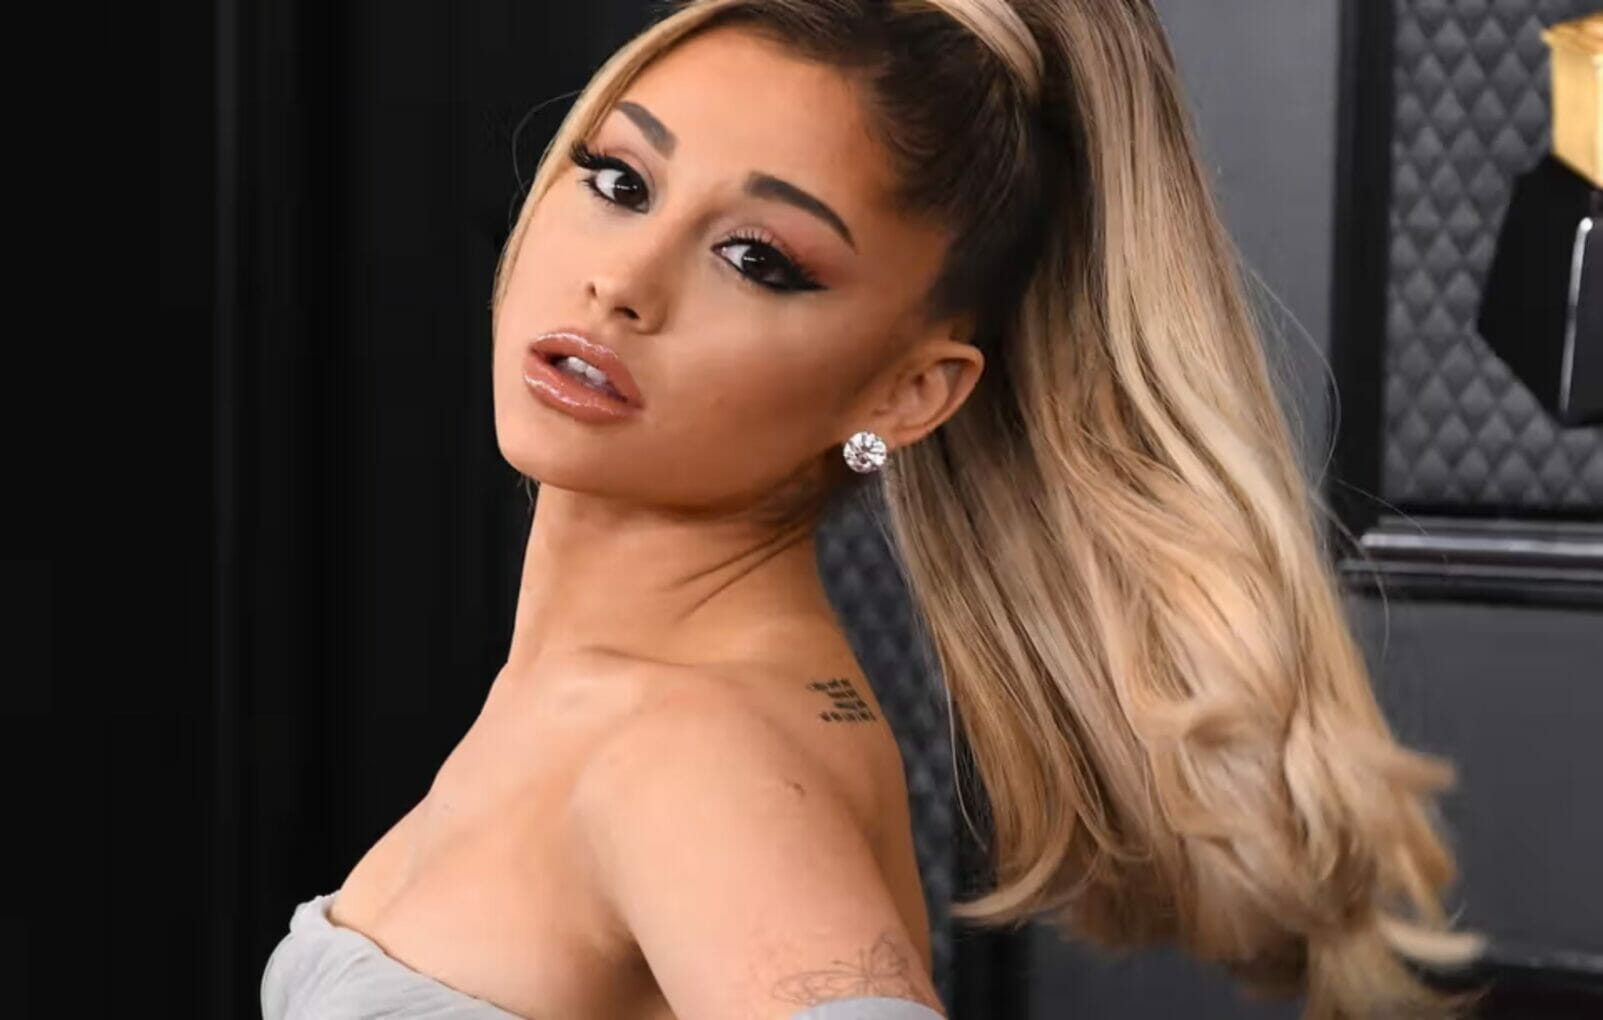 How old is Ariana Grande? Age, net worth, husband, family, height, bio